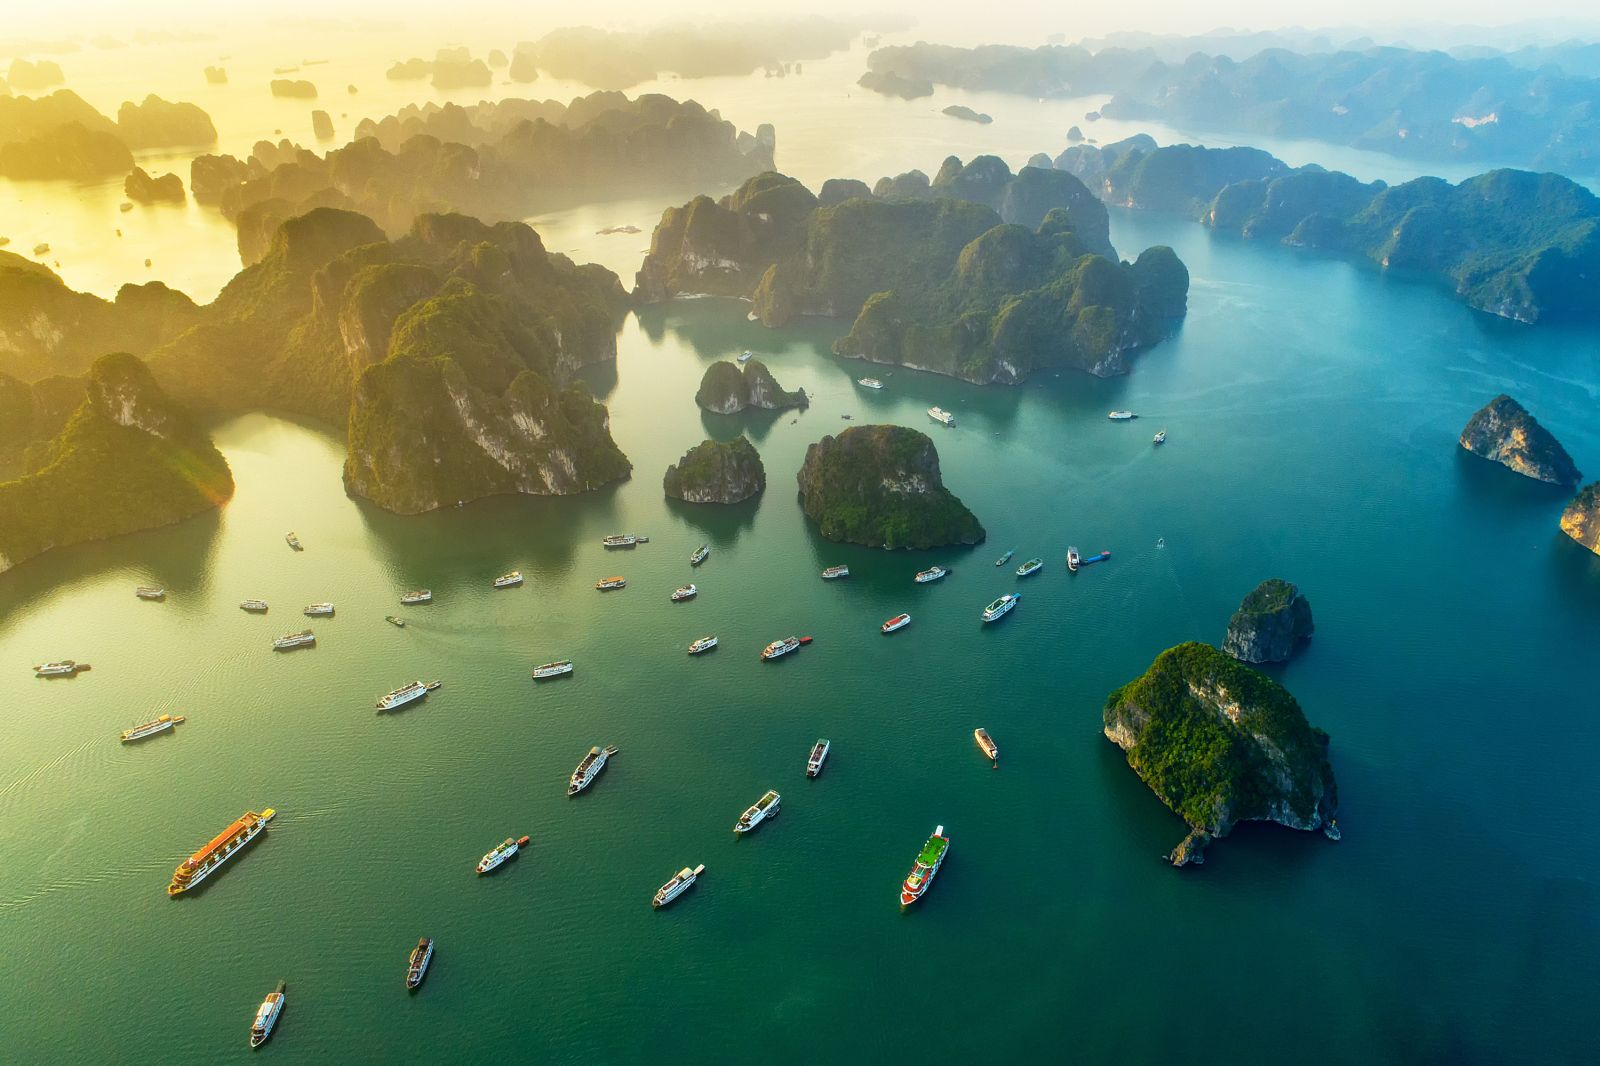 Aerial view of boats and limestone karsts in Ha Long Bay Vietnam